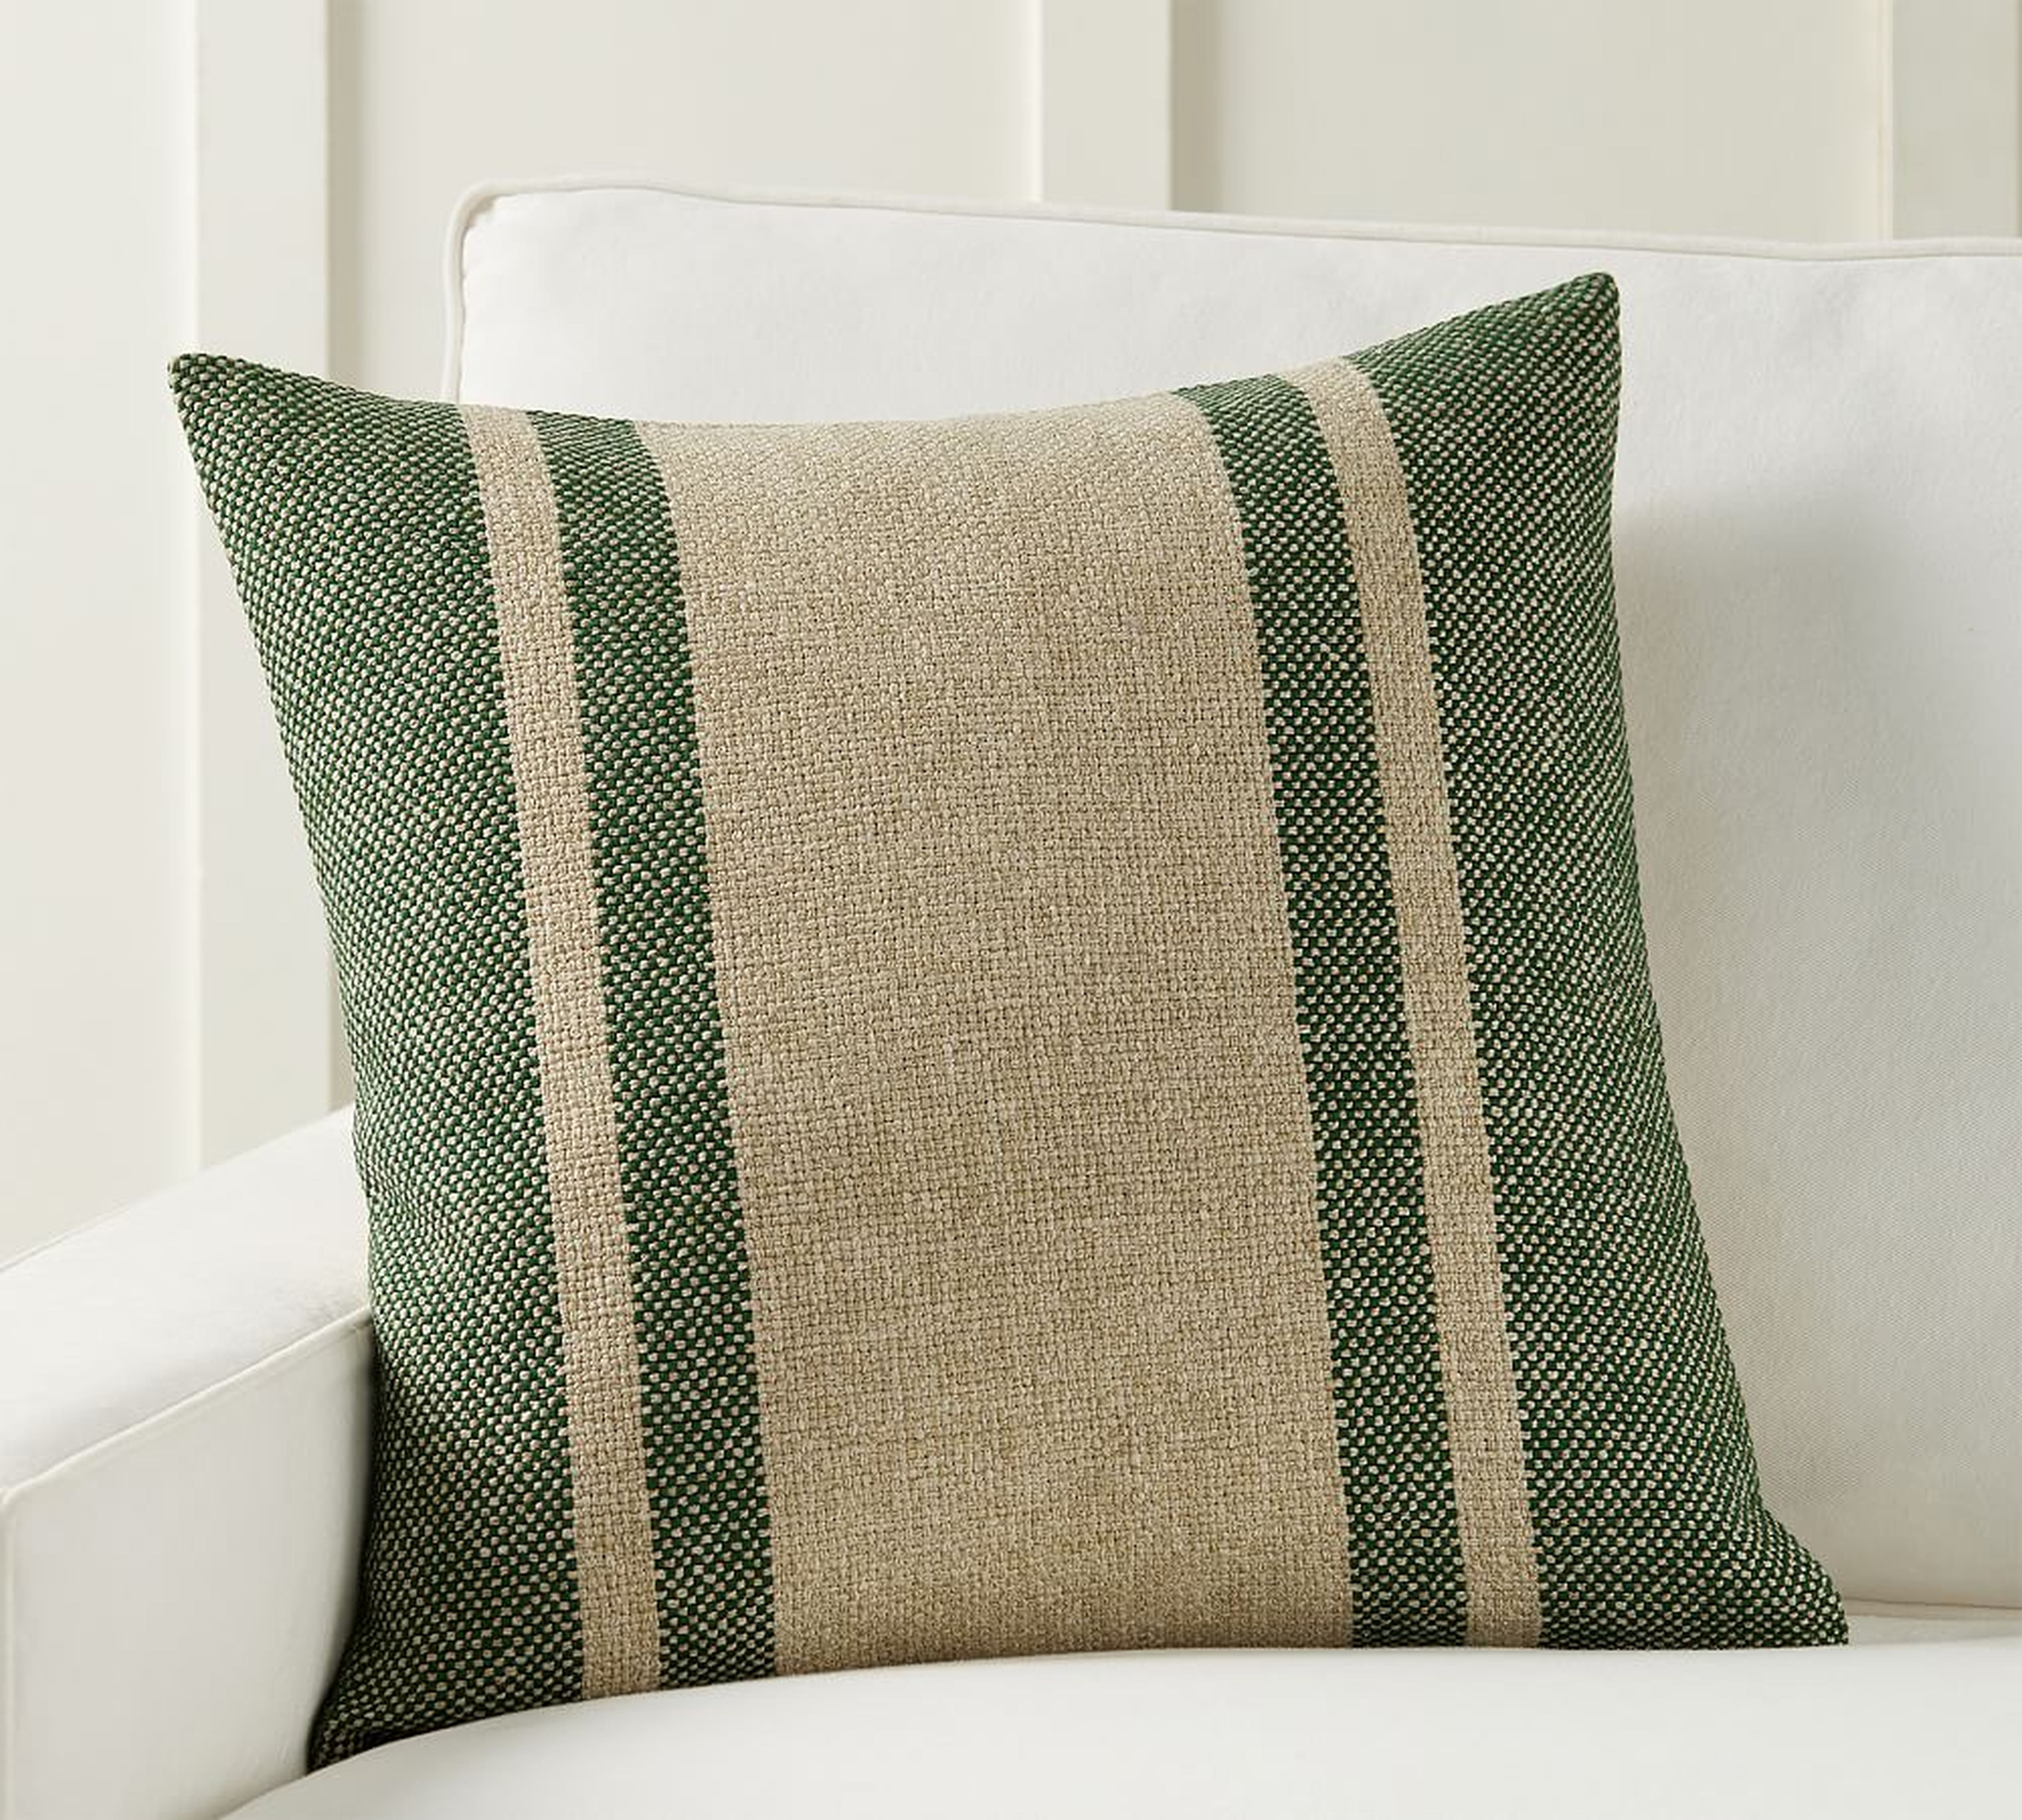 Blaine Striped Pillow Cover,22", Green - Pottery Barn